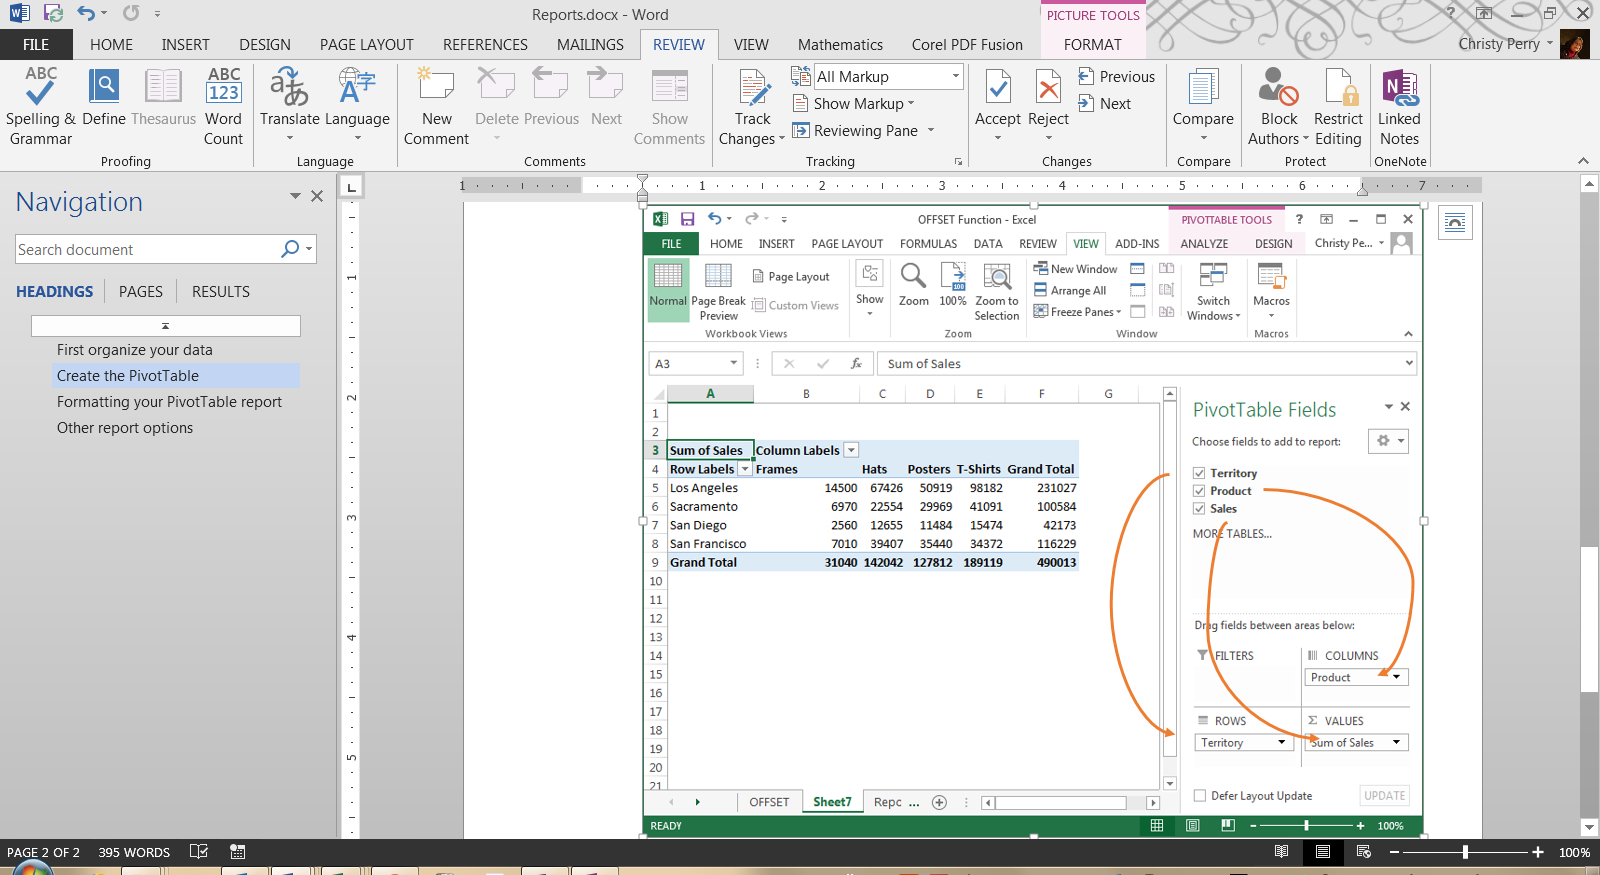 generate-report-from-excel-spreadsheet-spreadsheet-downloa-create-report-from-excel-spreadsheet